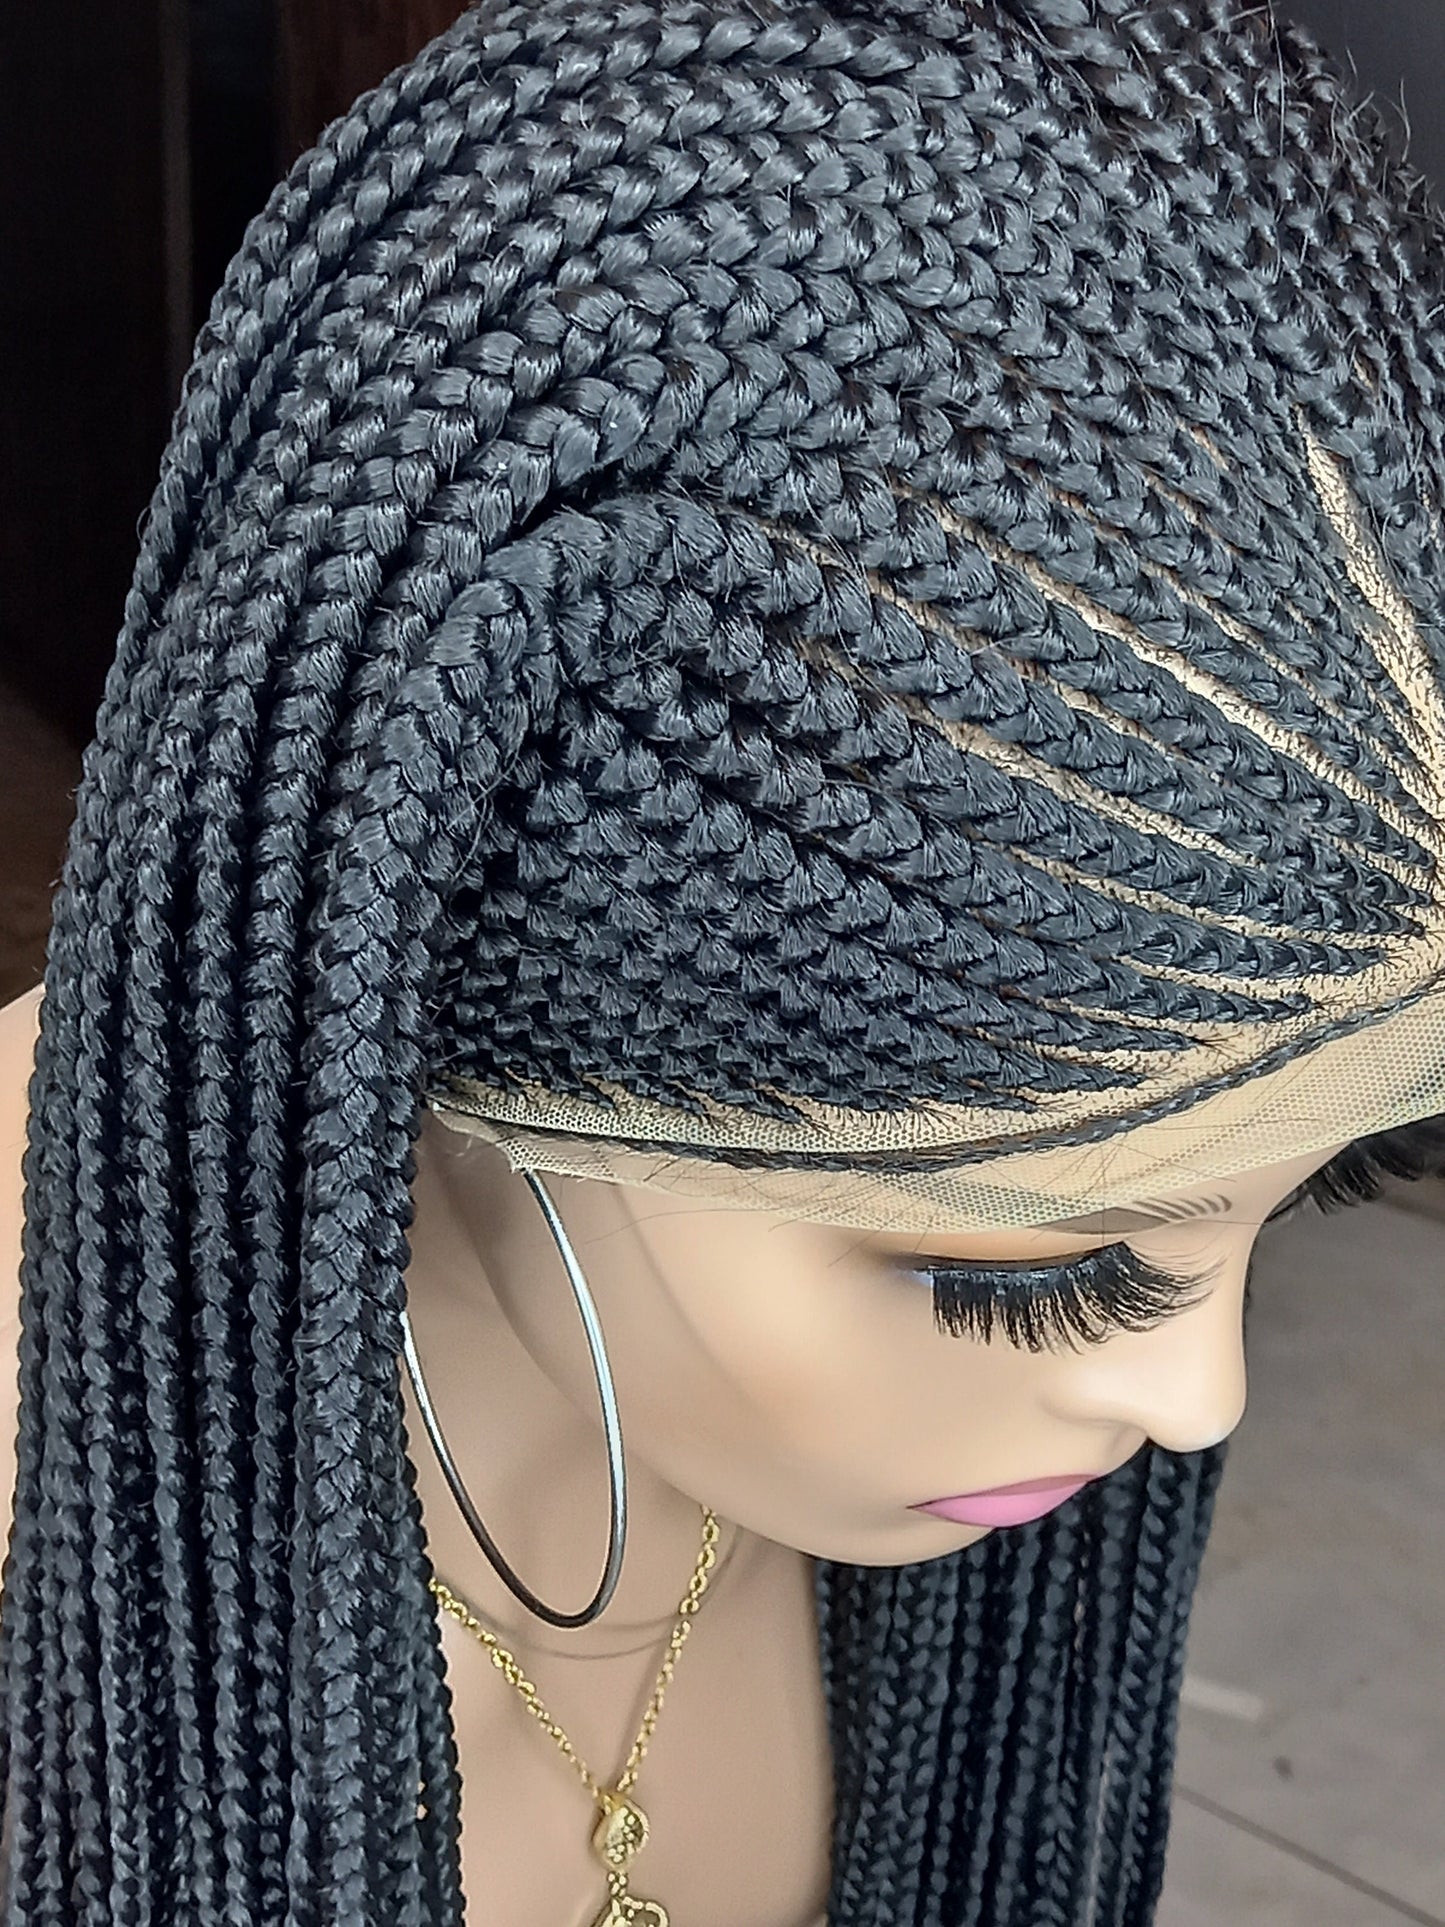 Cornrow wig on 13 by 5 lace front wig color 1, 30 inches, African braided lace wig for black women